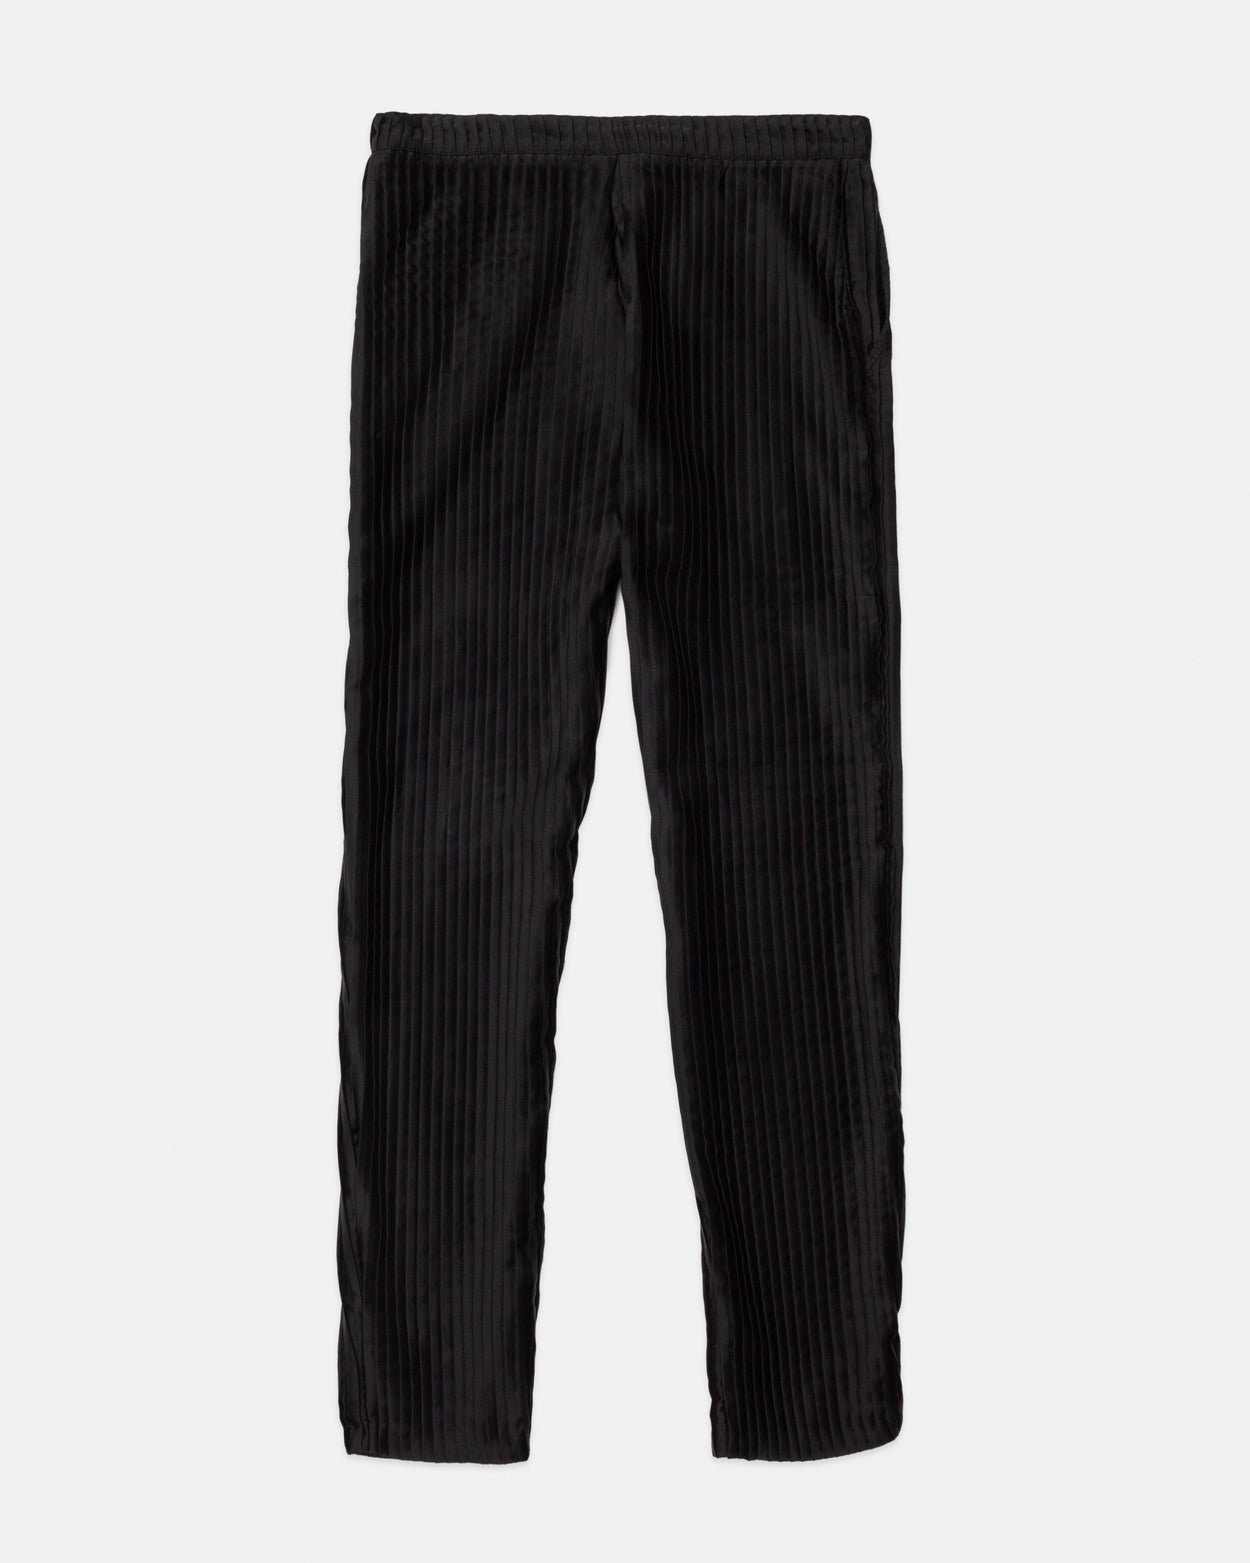 The Pleated Trousers